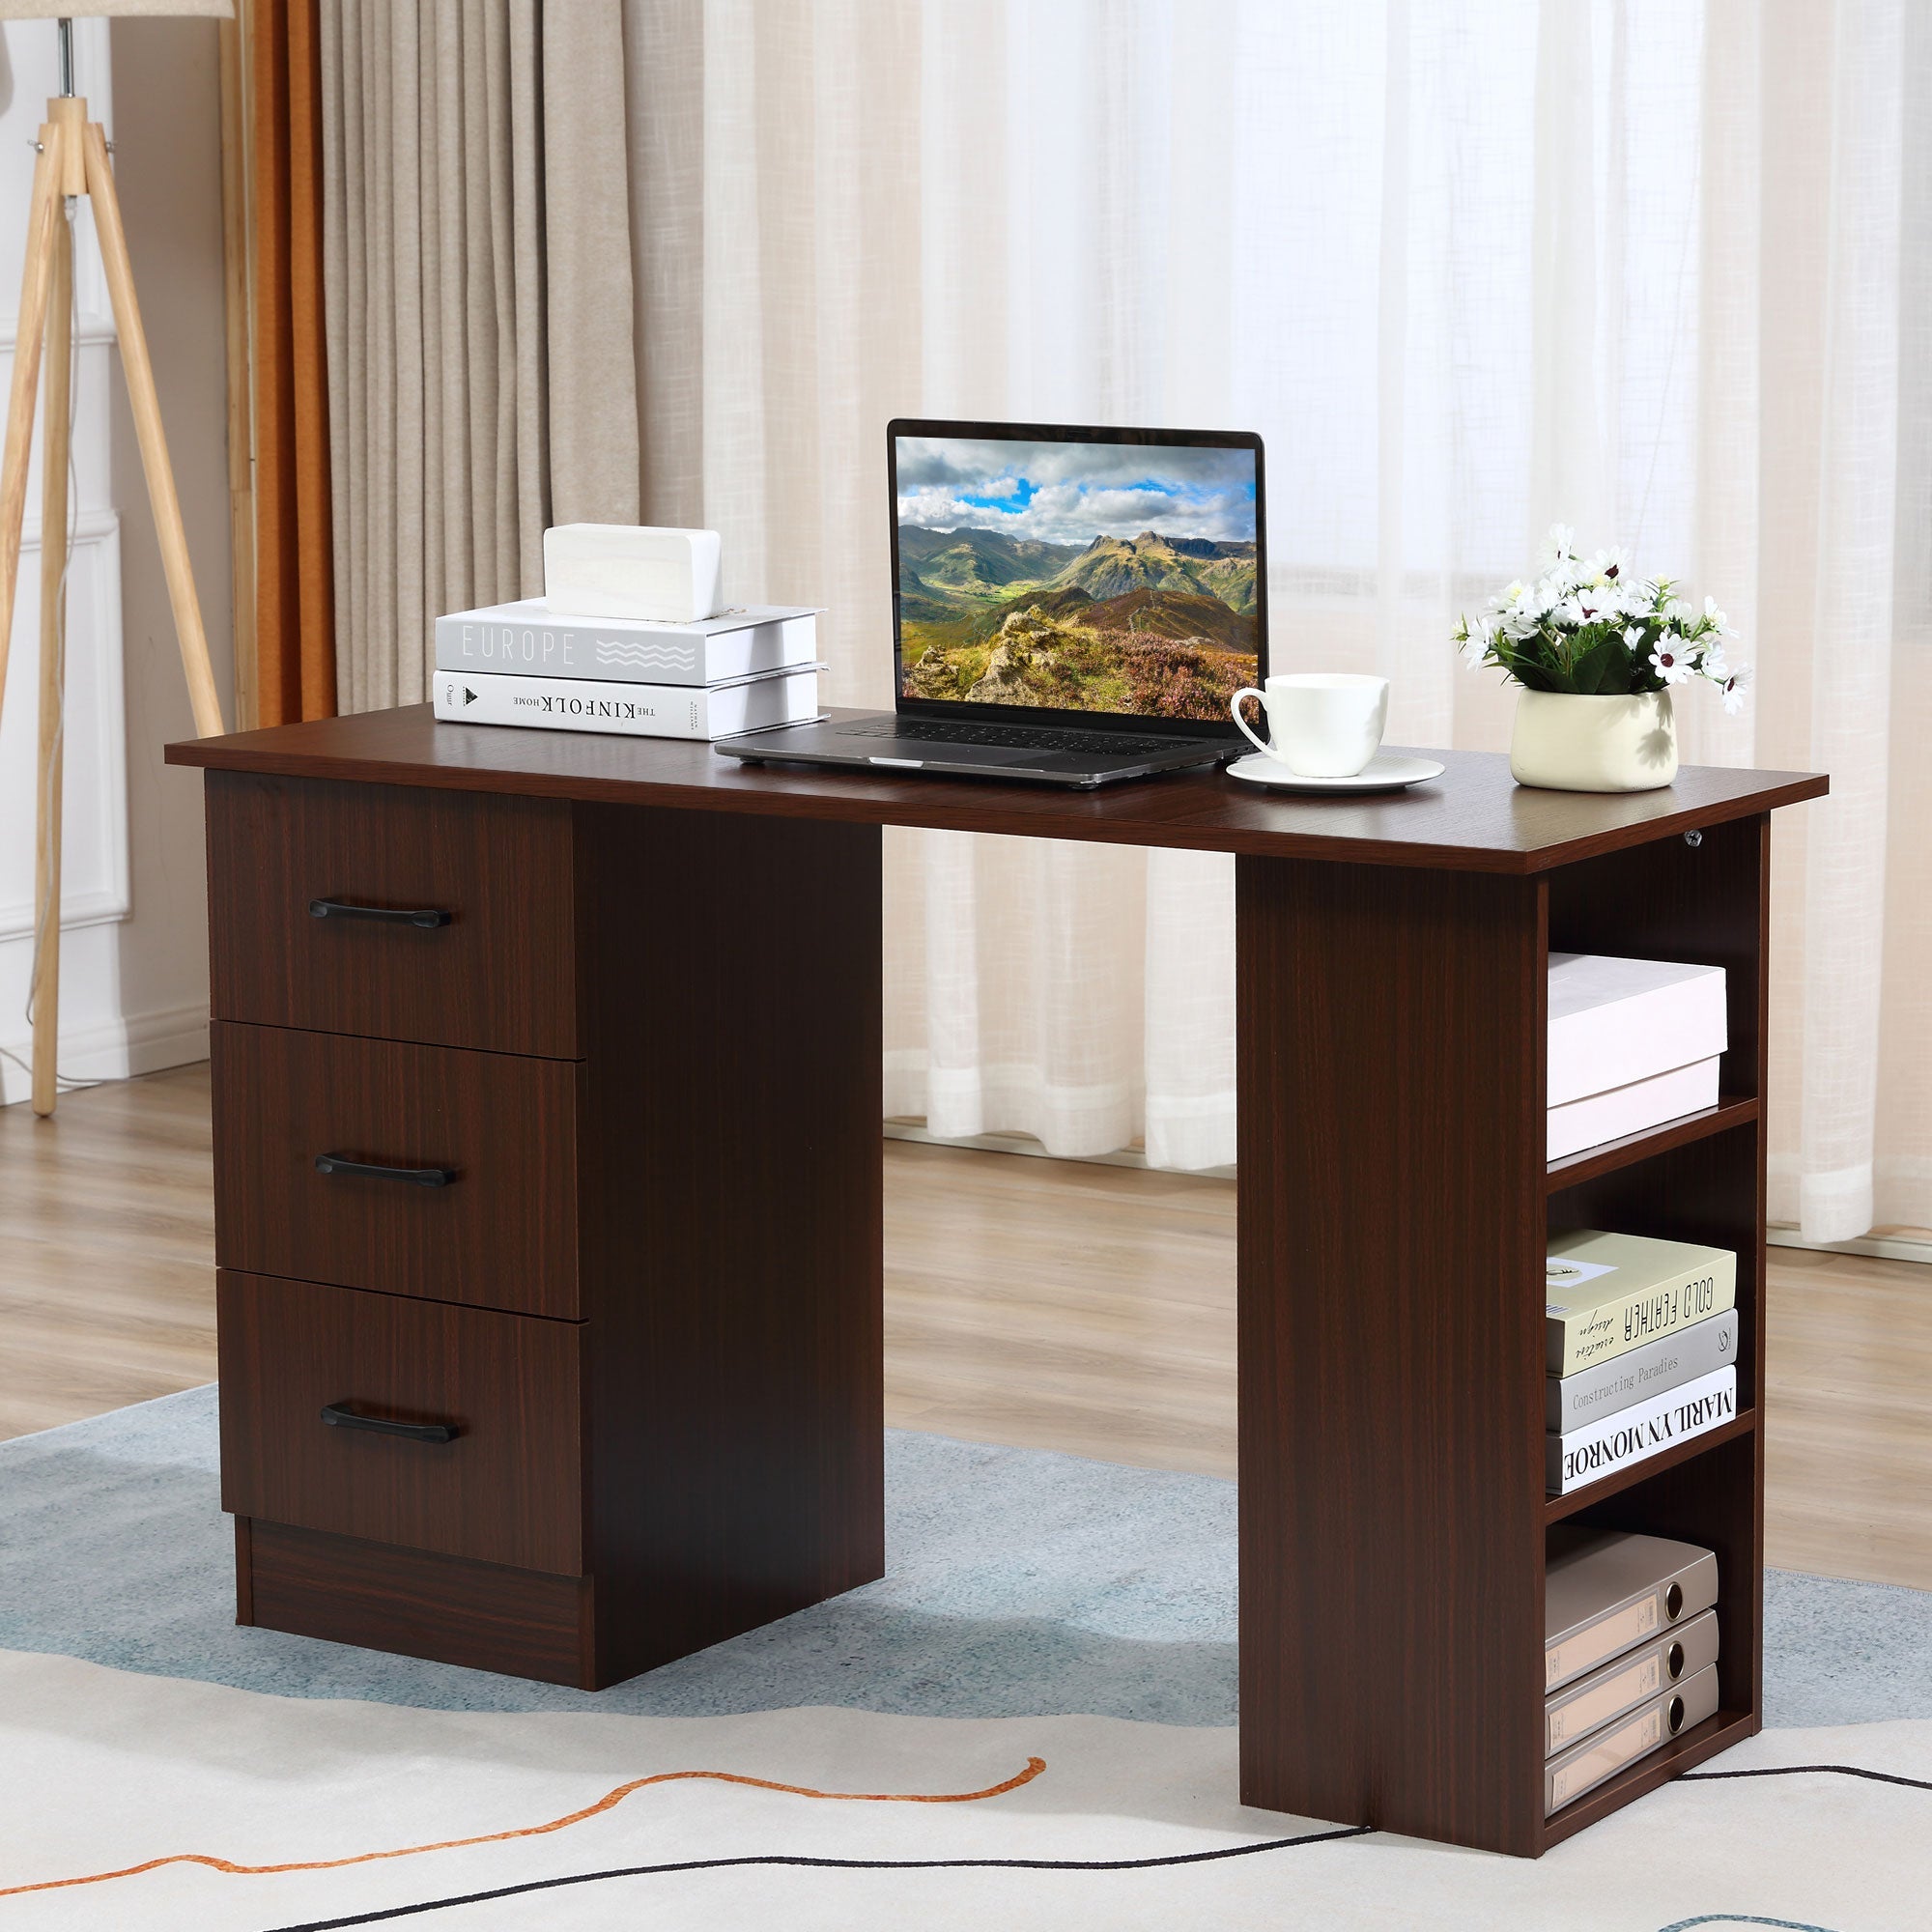 120cm Computer Desk with Storage Shelves Drawers, Writing Table Study Workstation for Home Office, Walnut Brown-0